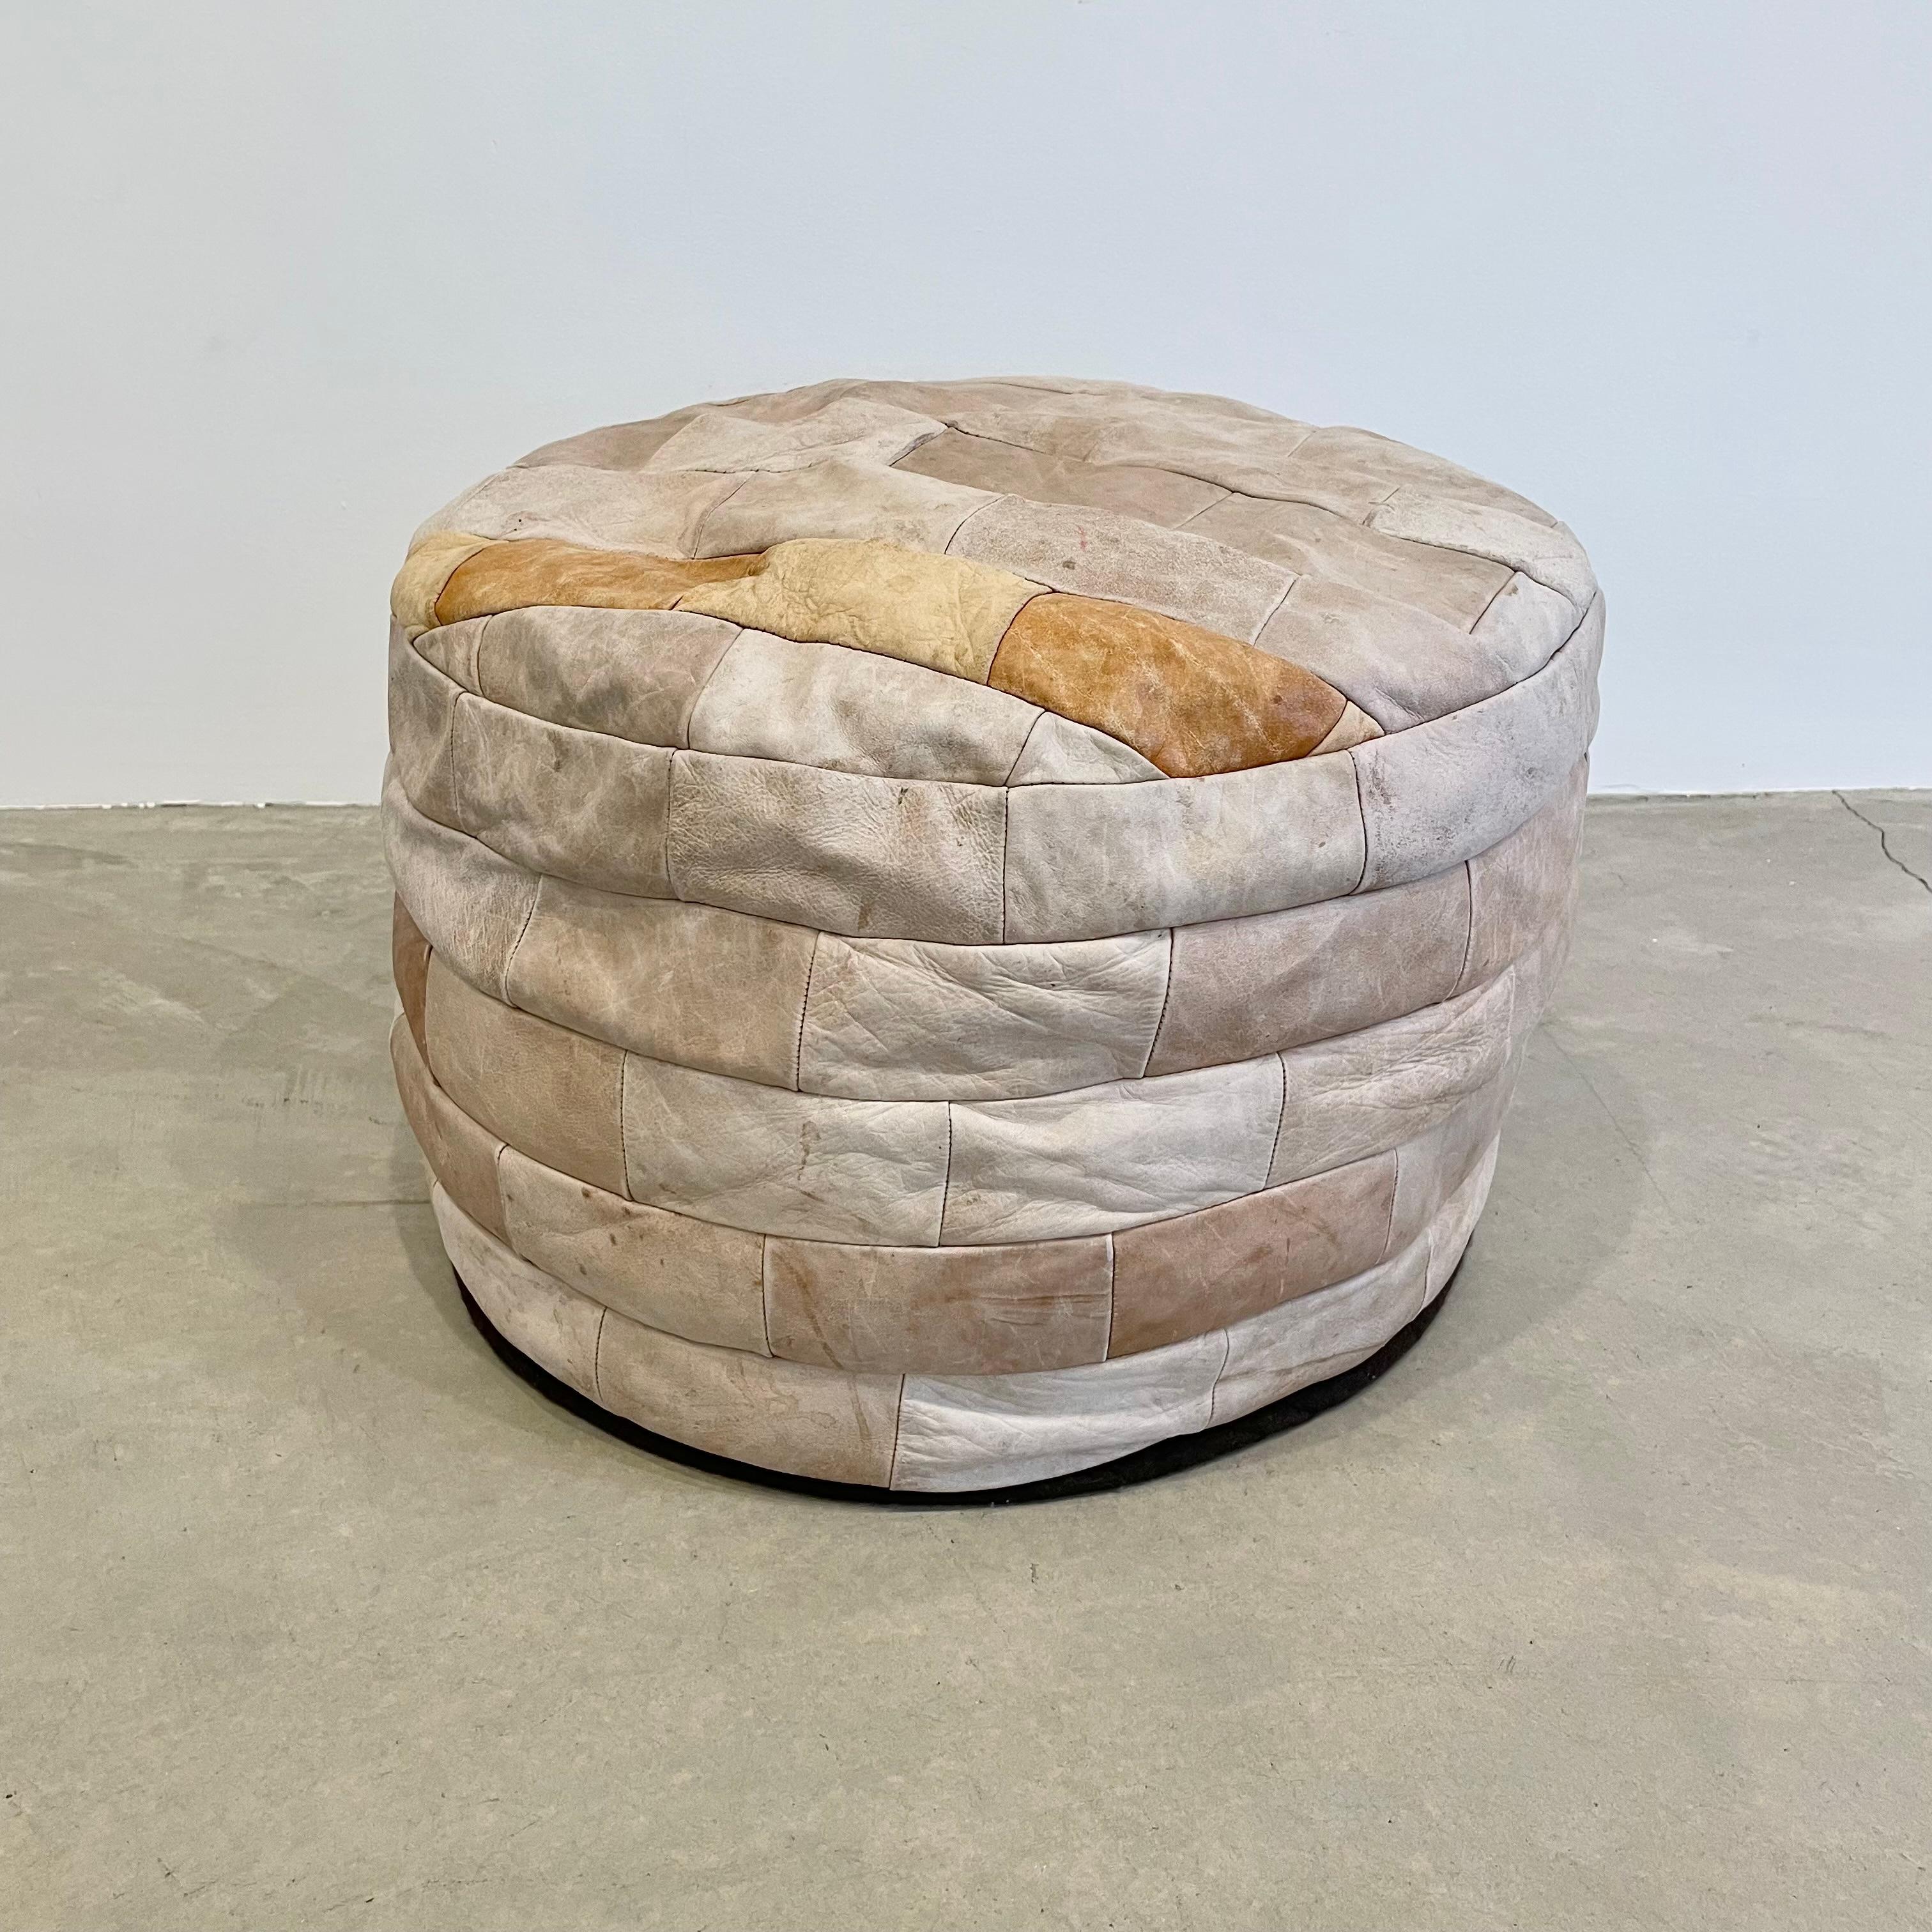 Gorgeous stone colored leather pouf/ottoman by Swiss designer De Sede with square patchwork. Handmade with wonderful faded patina of varying hues of stone and accents of tan. Gorgeous accent piece. Good vintage condition. Wear appropriate with age.